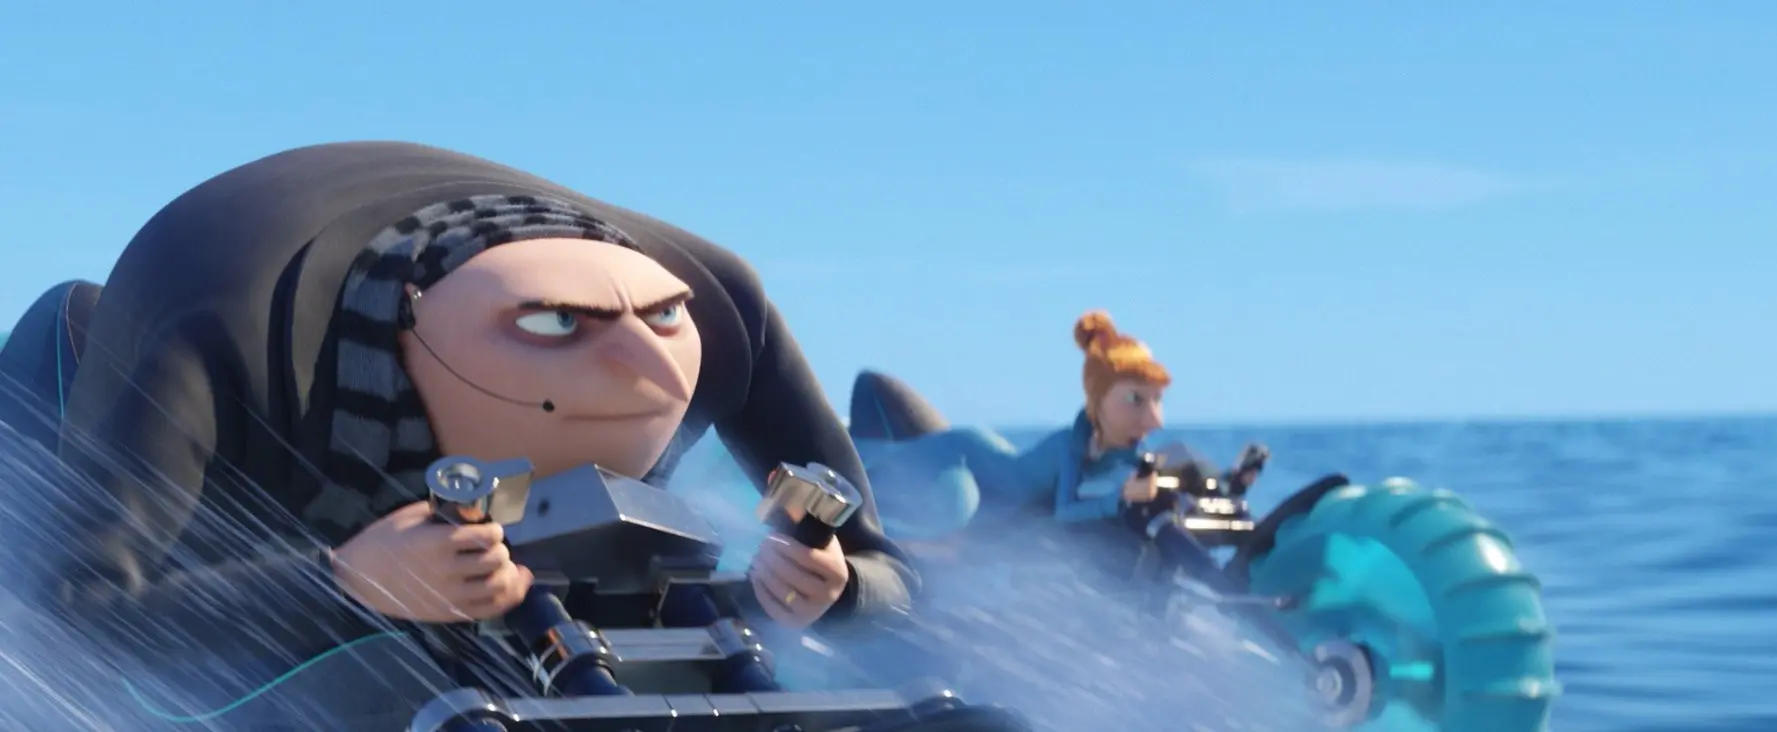 Despicable Me 3 © 2016 - Universal Pictures